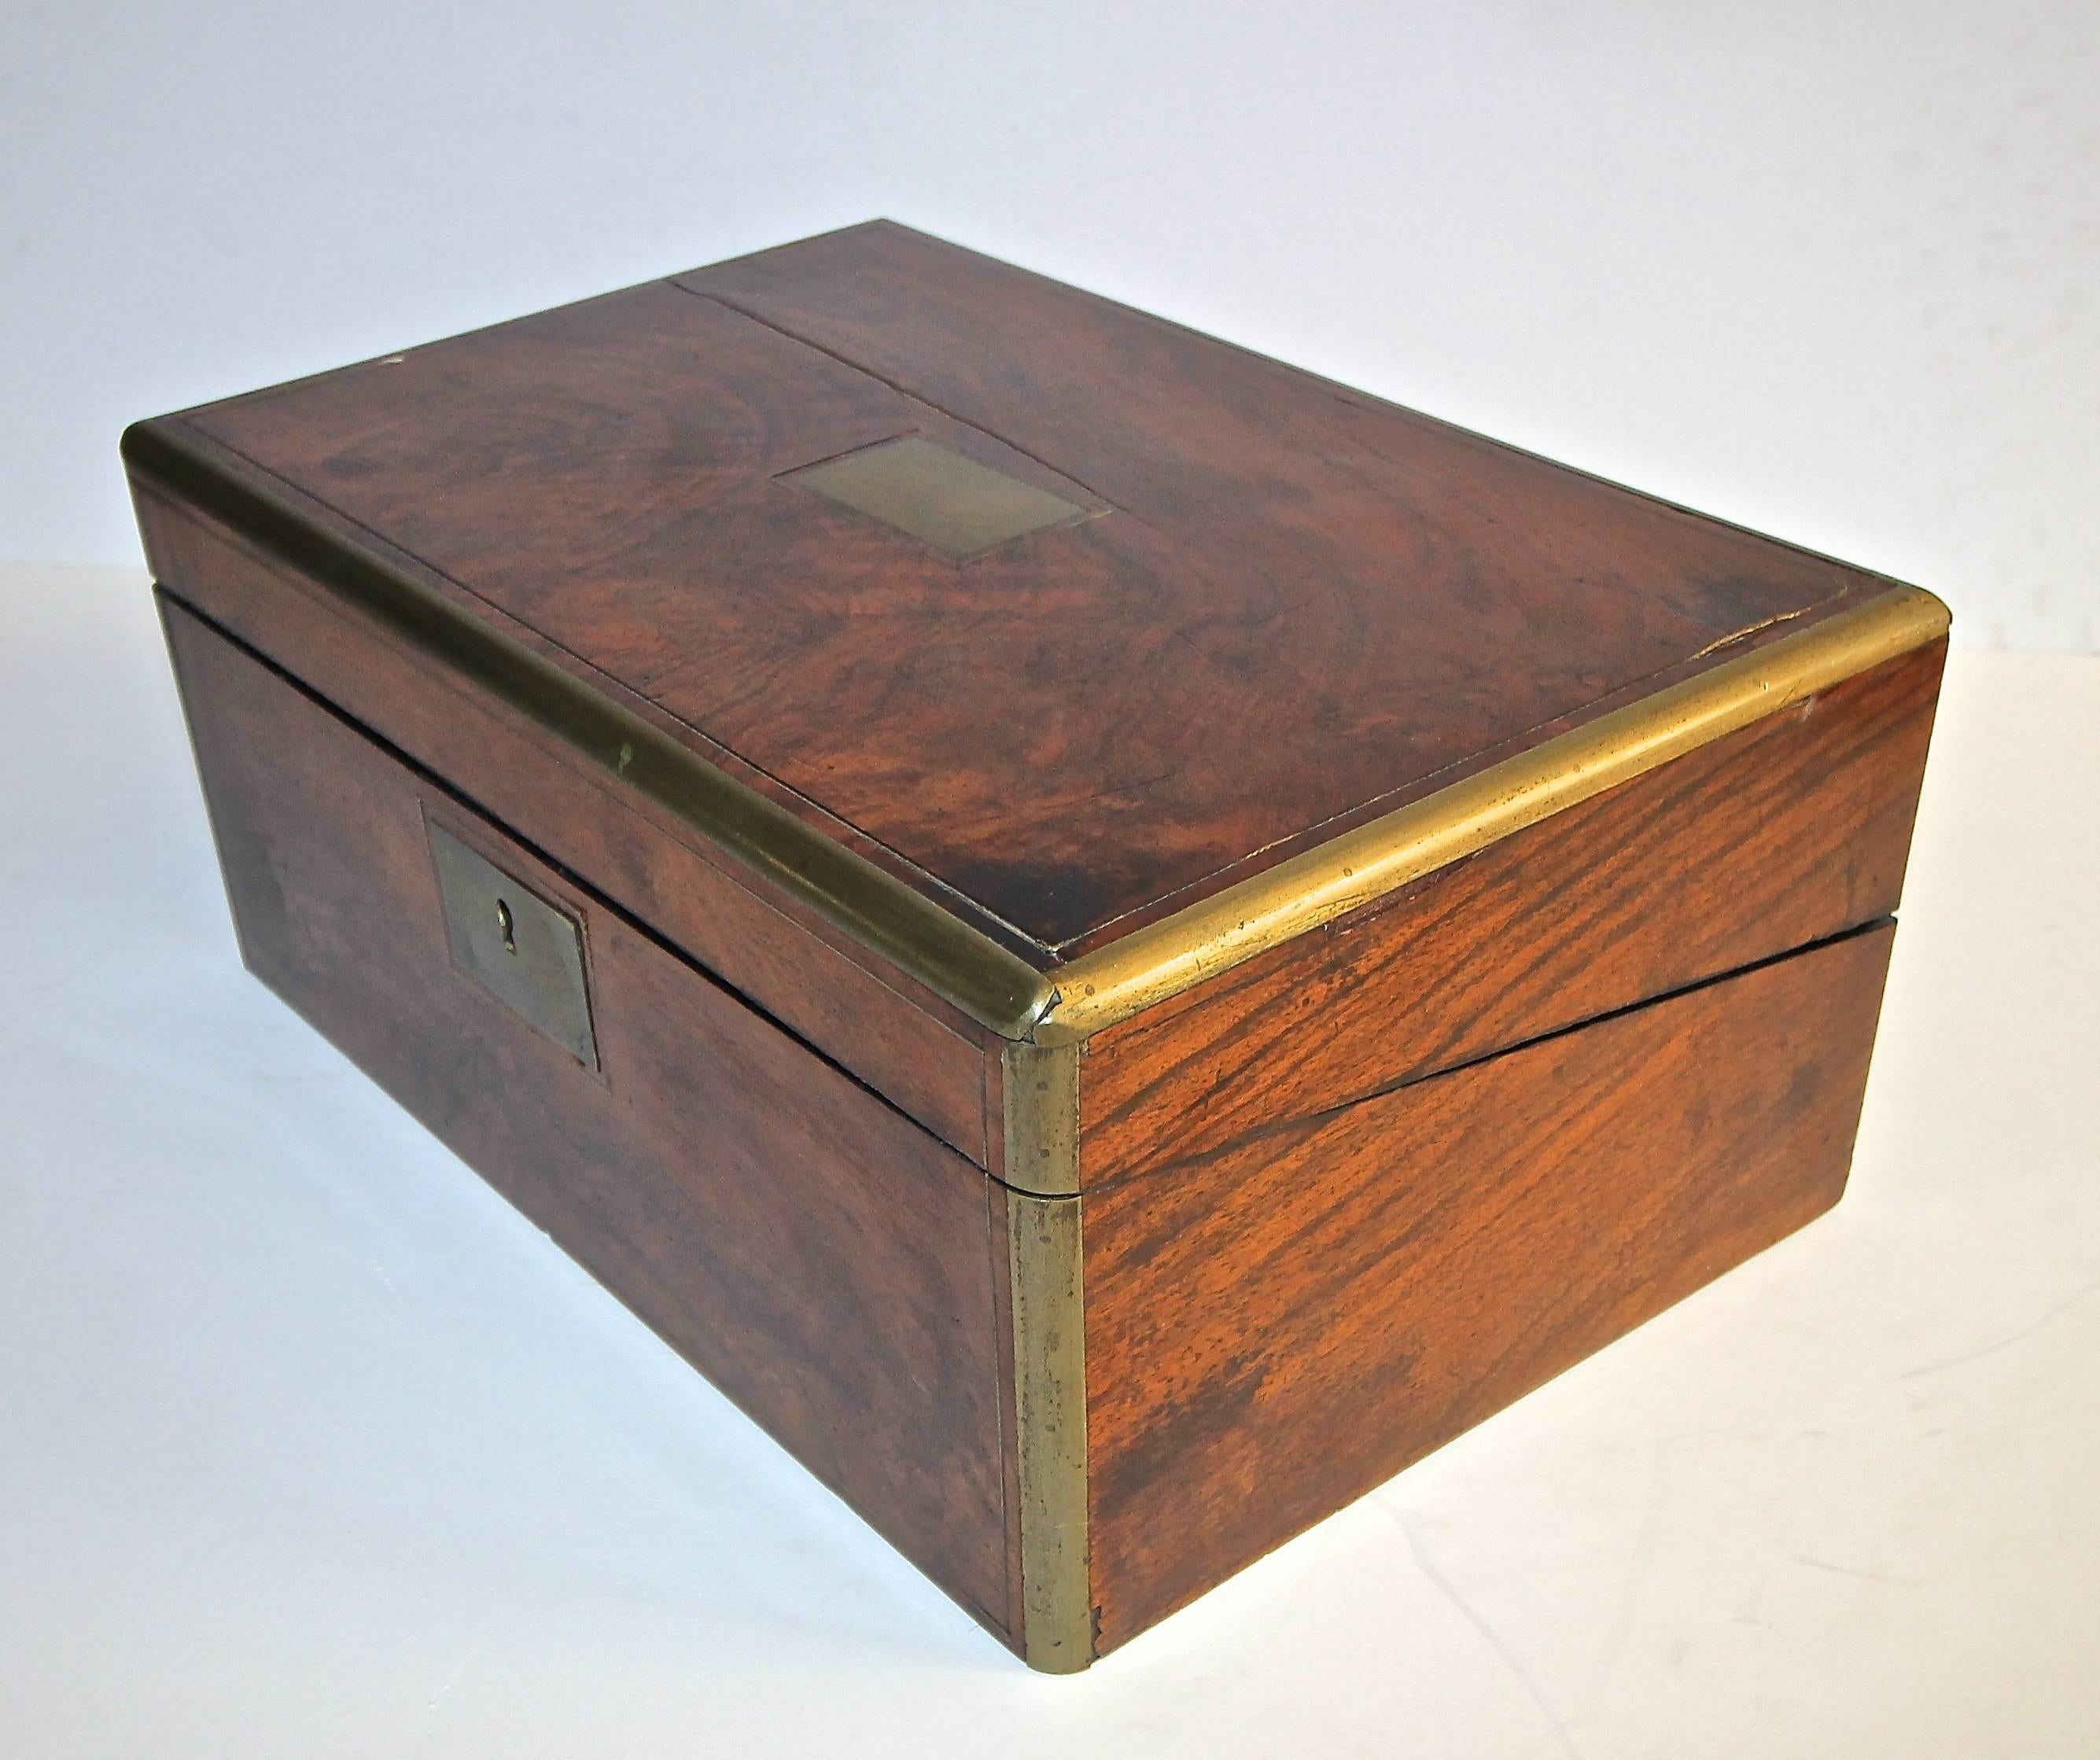 19th century English mahogany and brass writing box with leather writing top and storage compartments.